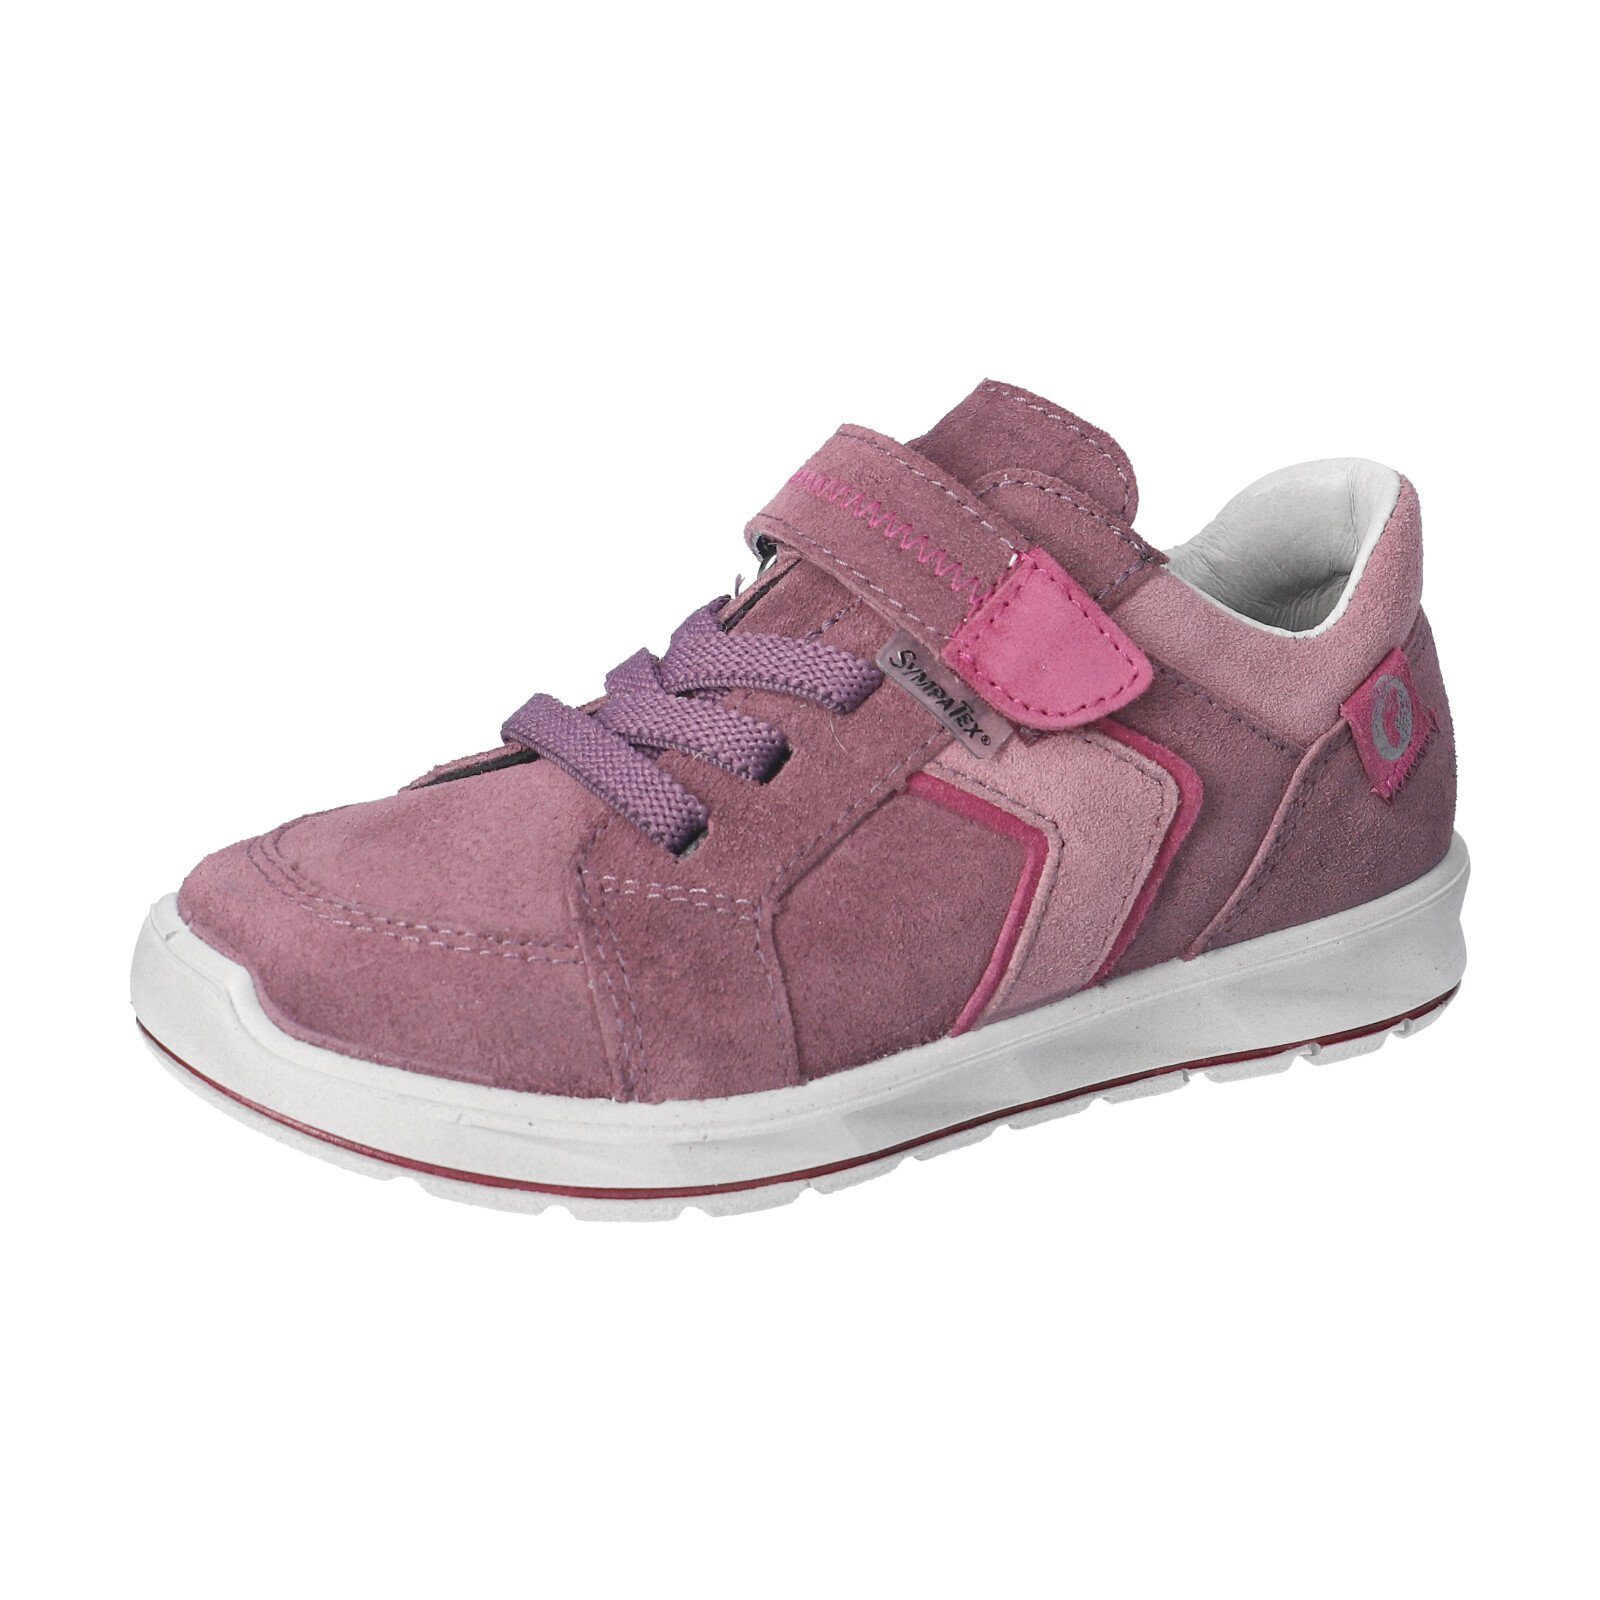 Ricosta Sneaker pflaume/sucre (370)